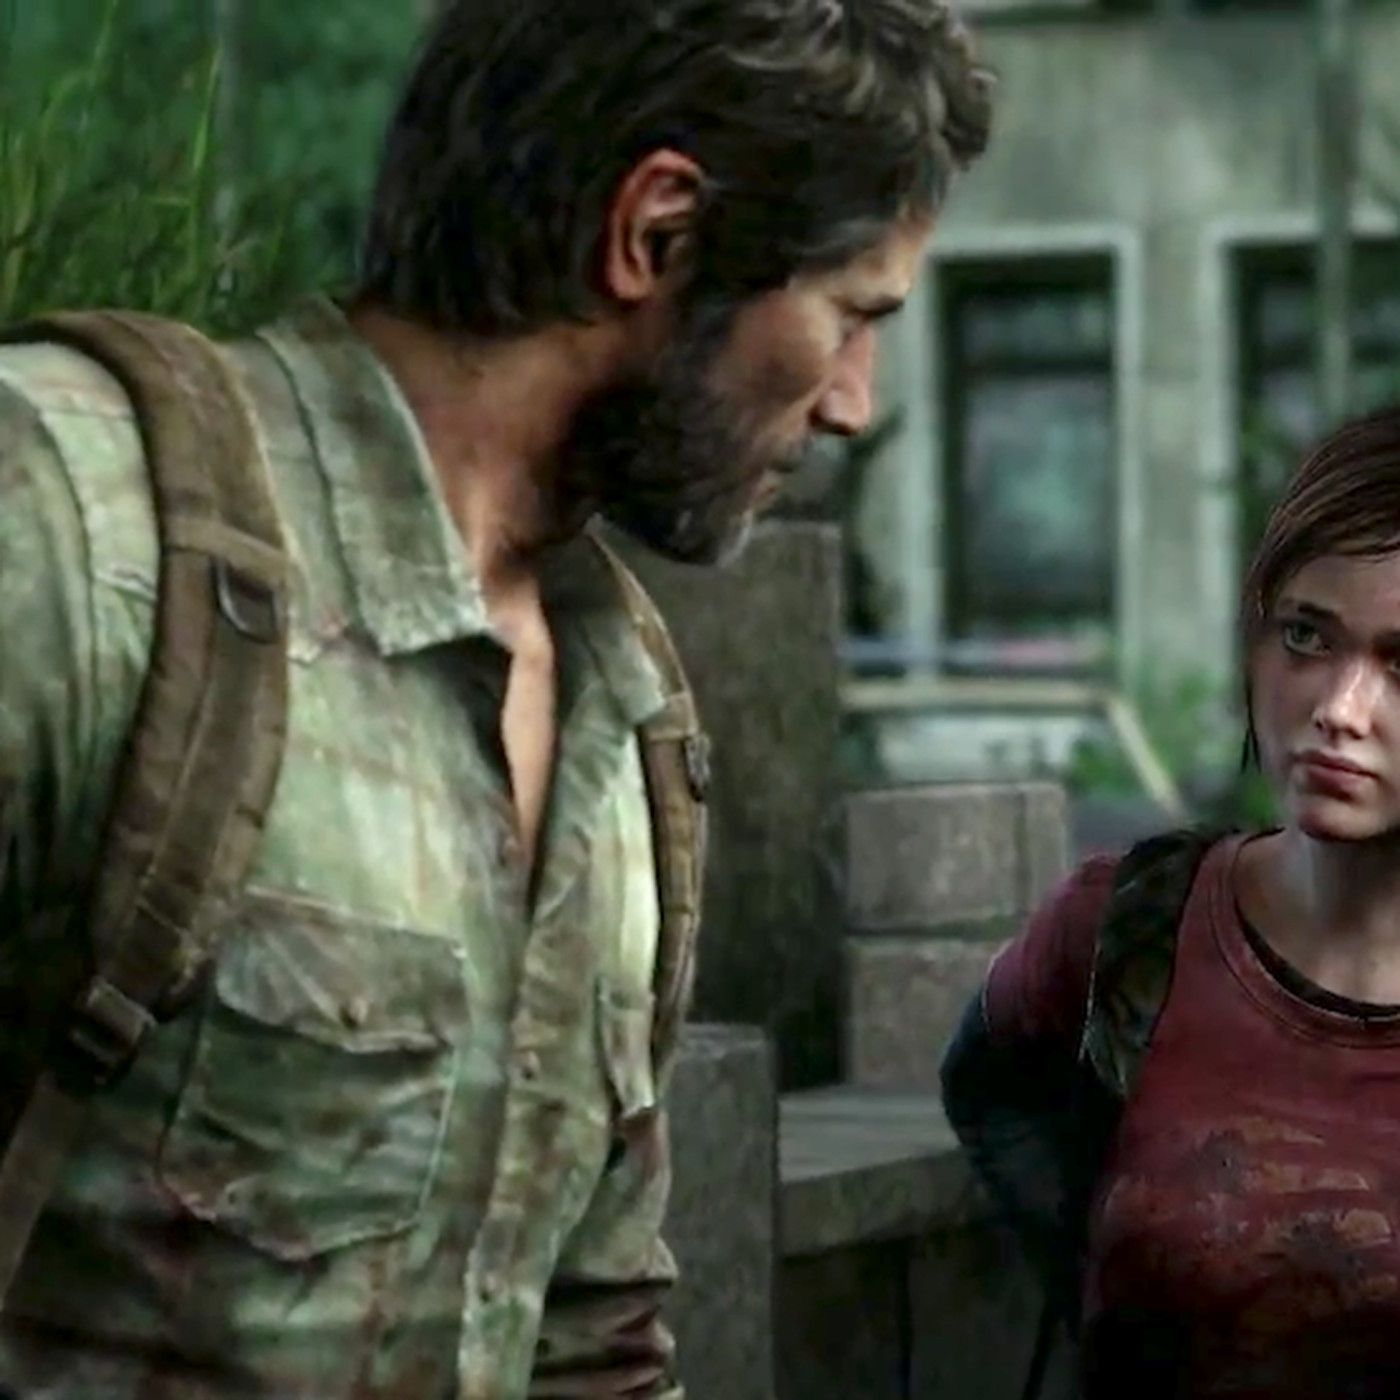 The Last of Us Part 2's creators said Ellie is the only playable